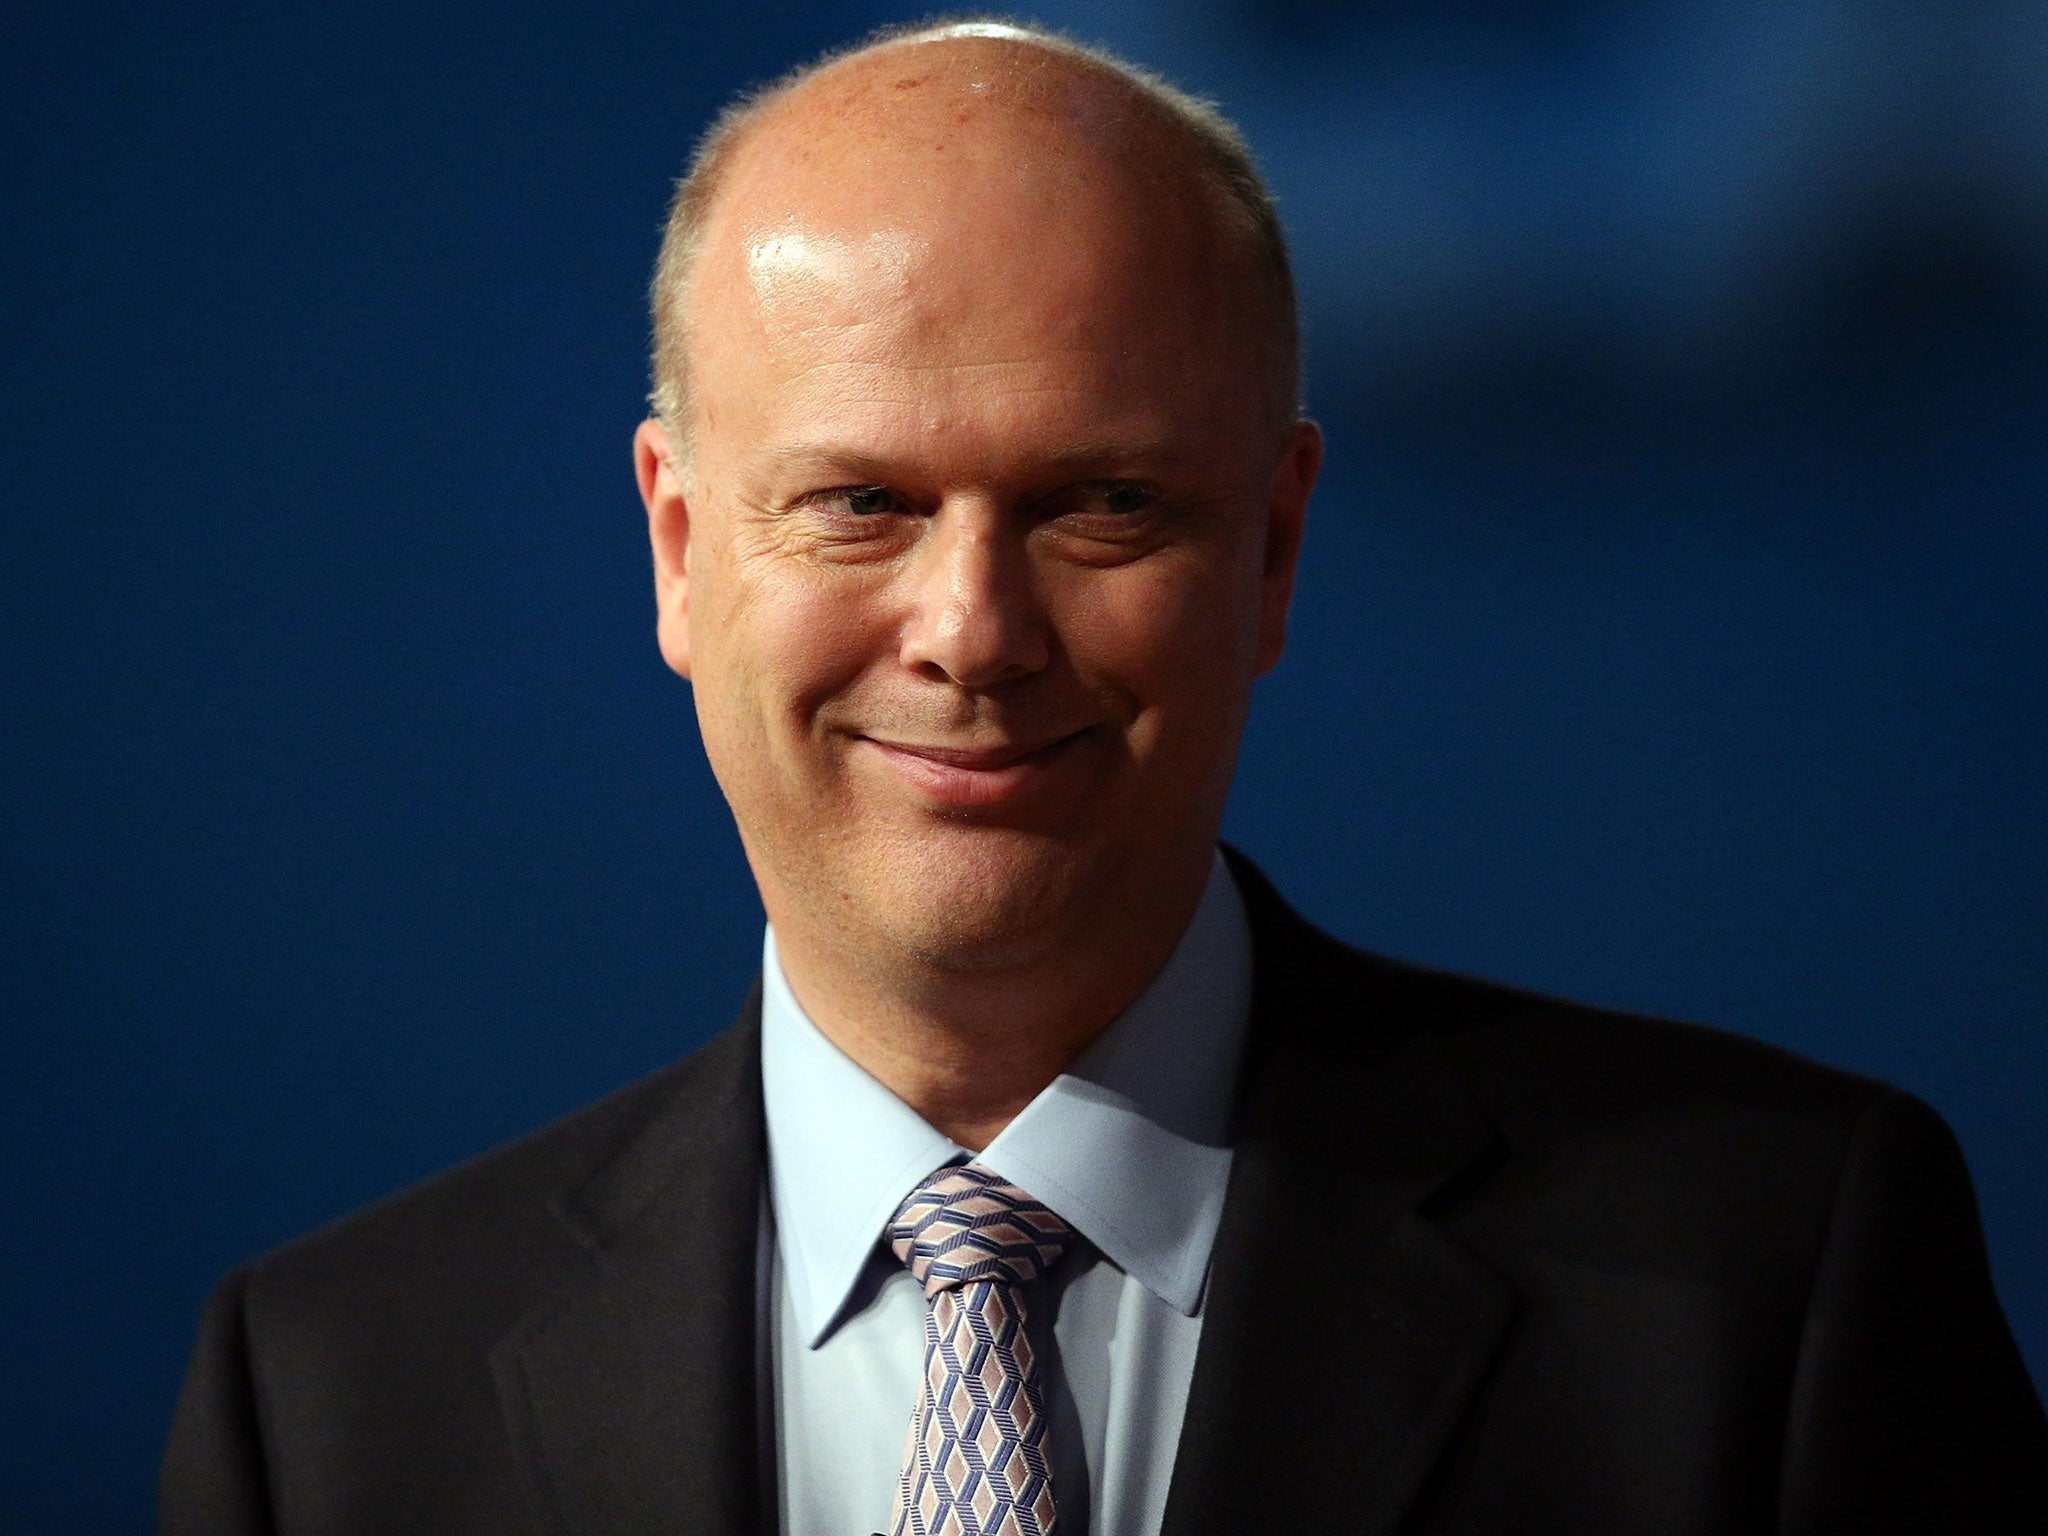 Chris Grayling's Ministry of Justice blocked an investigation into the hidden problem of rape and sexual abuse in British prisons, it has emerged